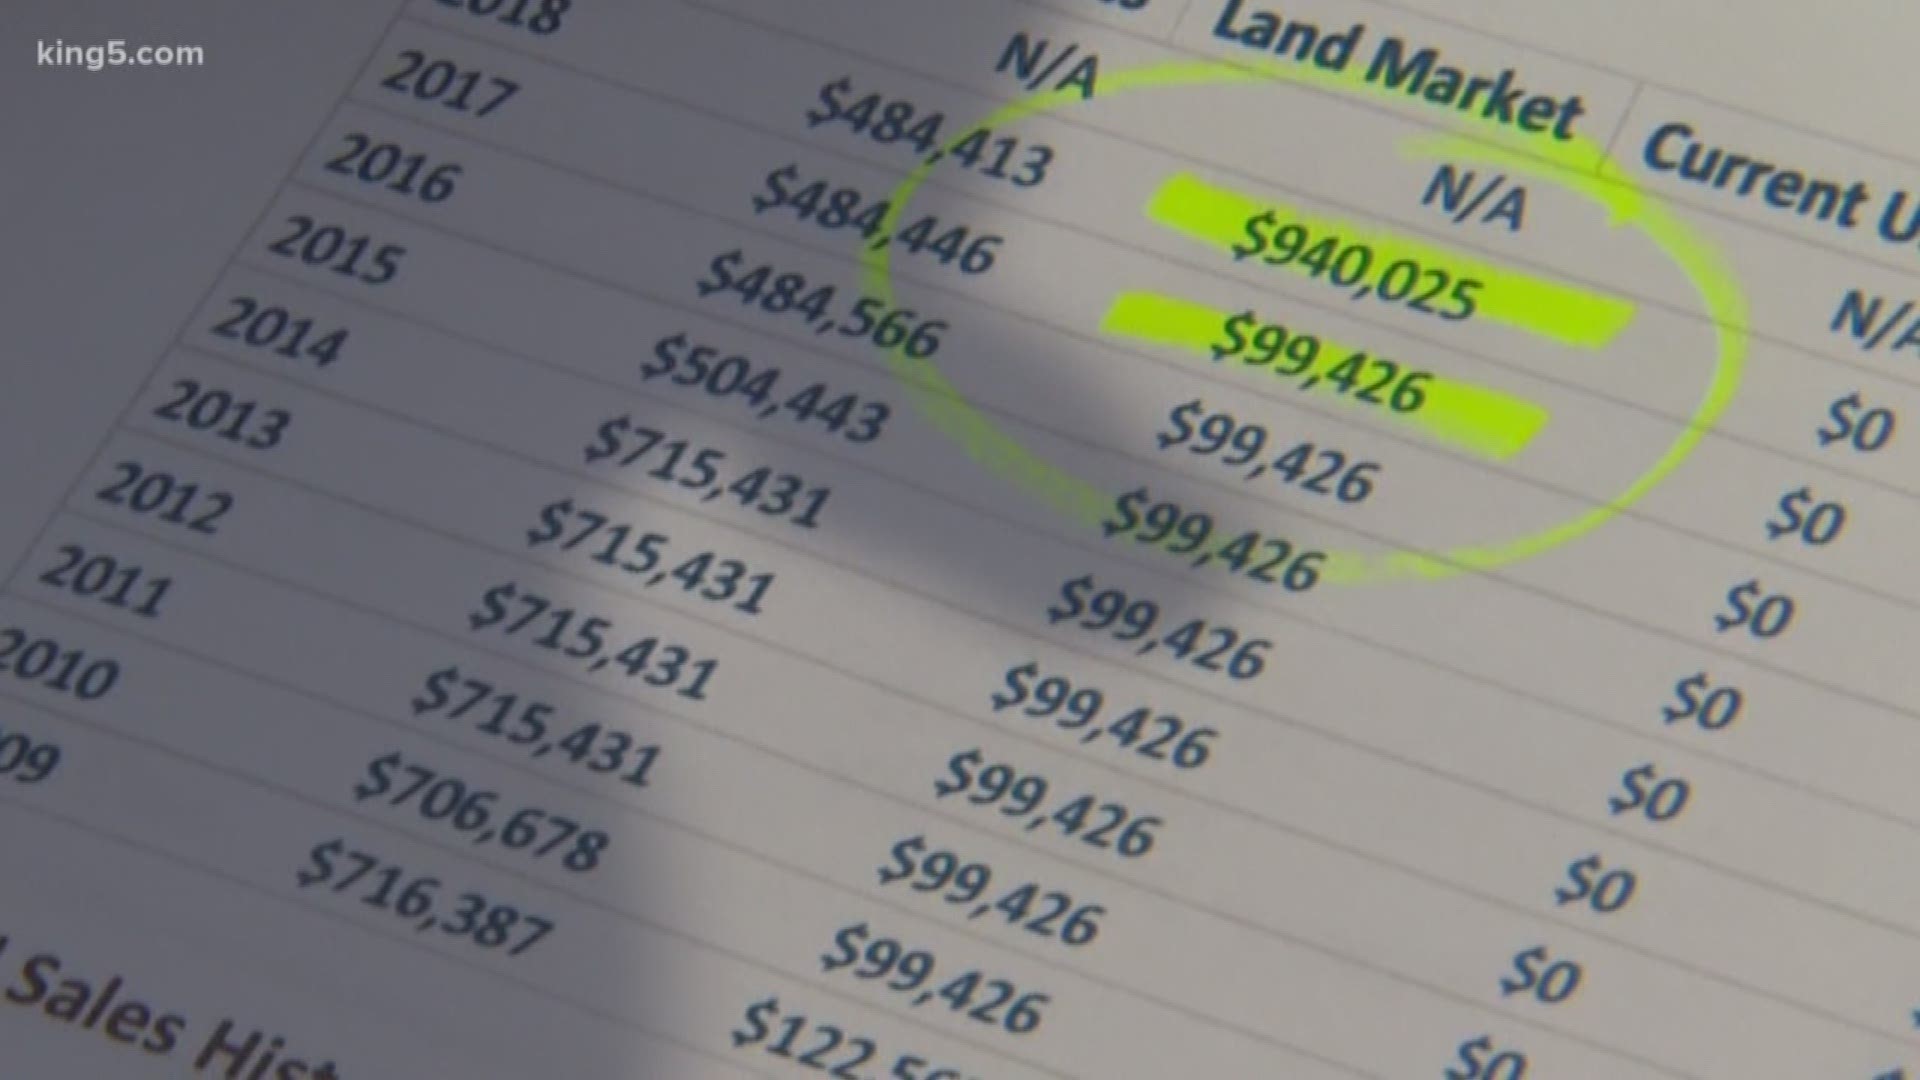 A Whidbey Island man is really feeling the pinch after seeing his property values increase by more than 800-percent. The county calls it "human error" but says he's still on the hook for the full bill. KING 5's Eric Wilkinson explains.